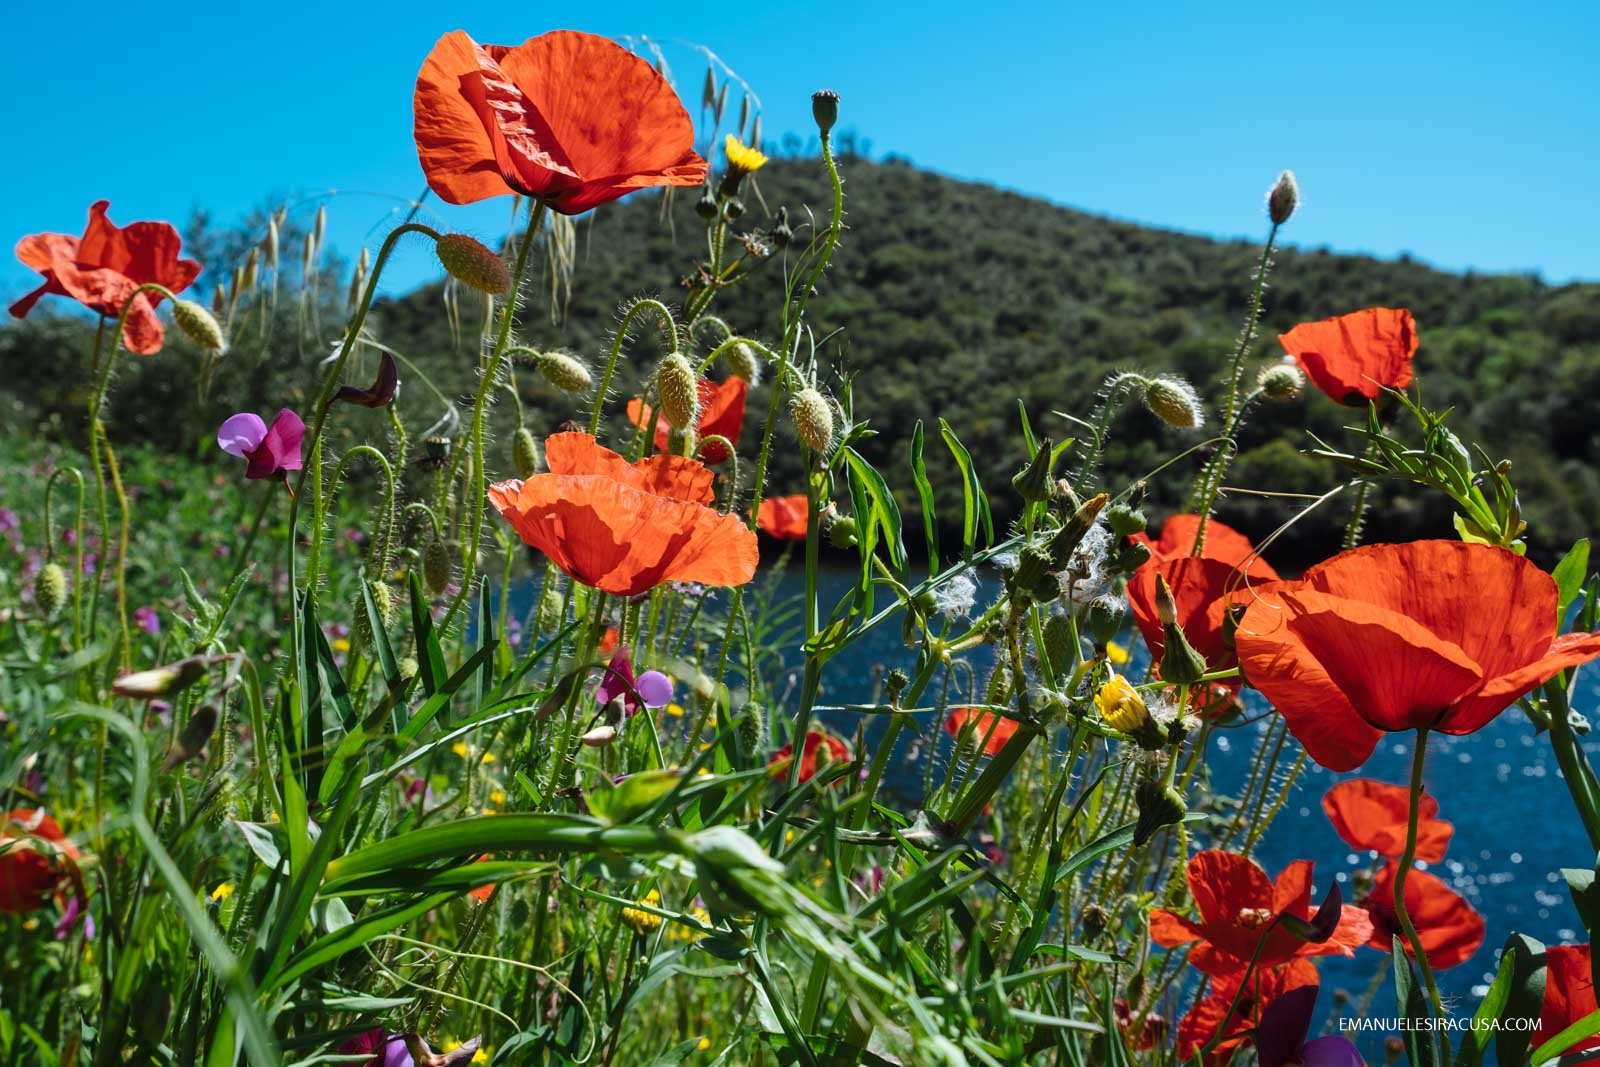 Red poppies on the Portuguese bank of the Tejo River in the Tejo Internacional Nature Park, Malpica do Tejo, 2016